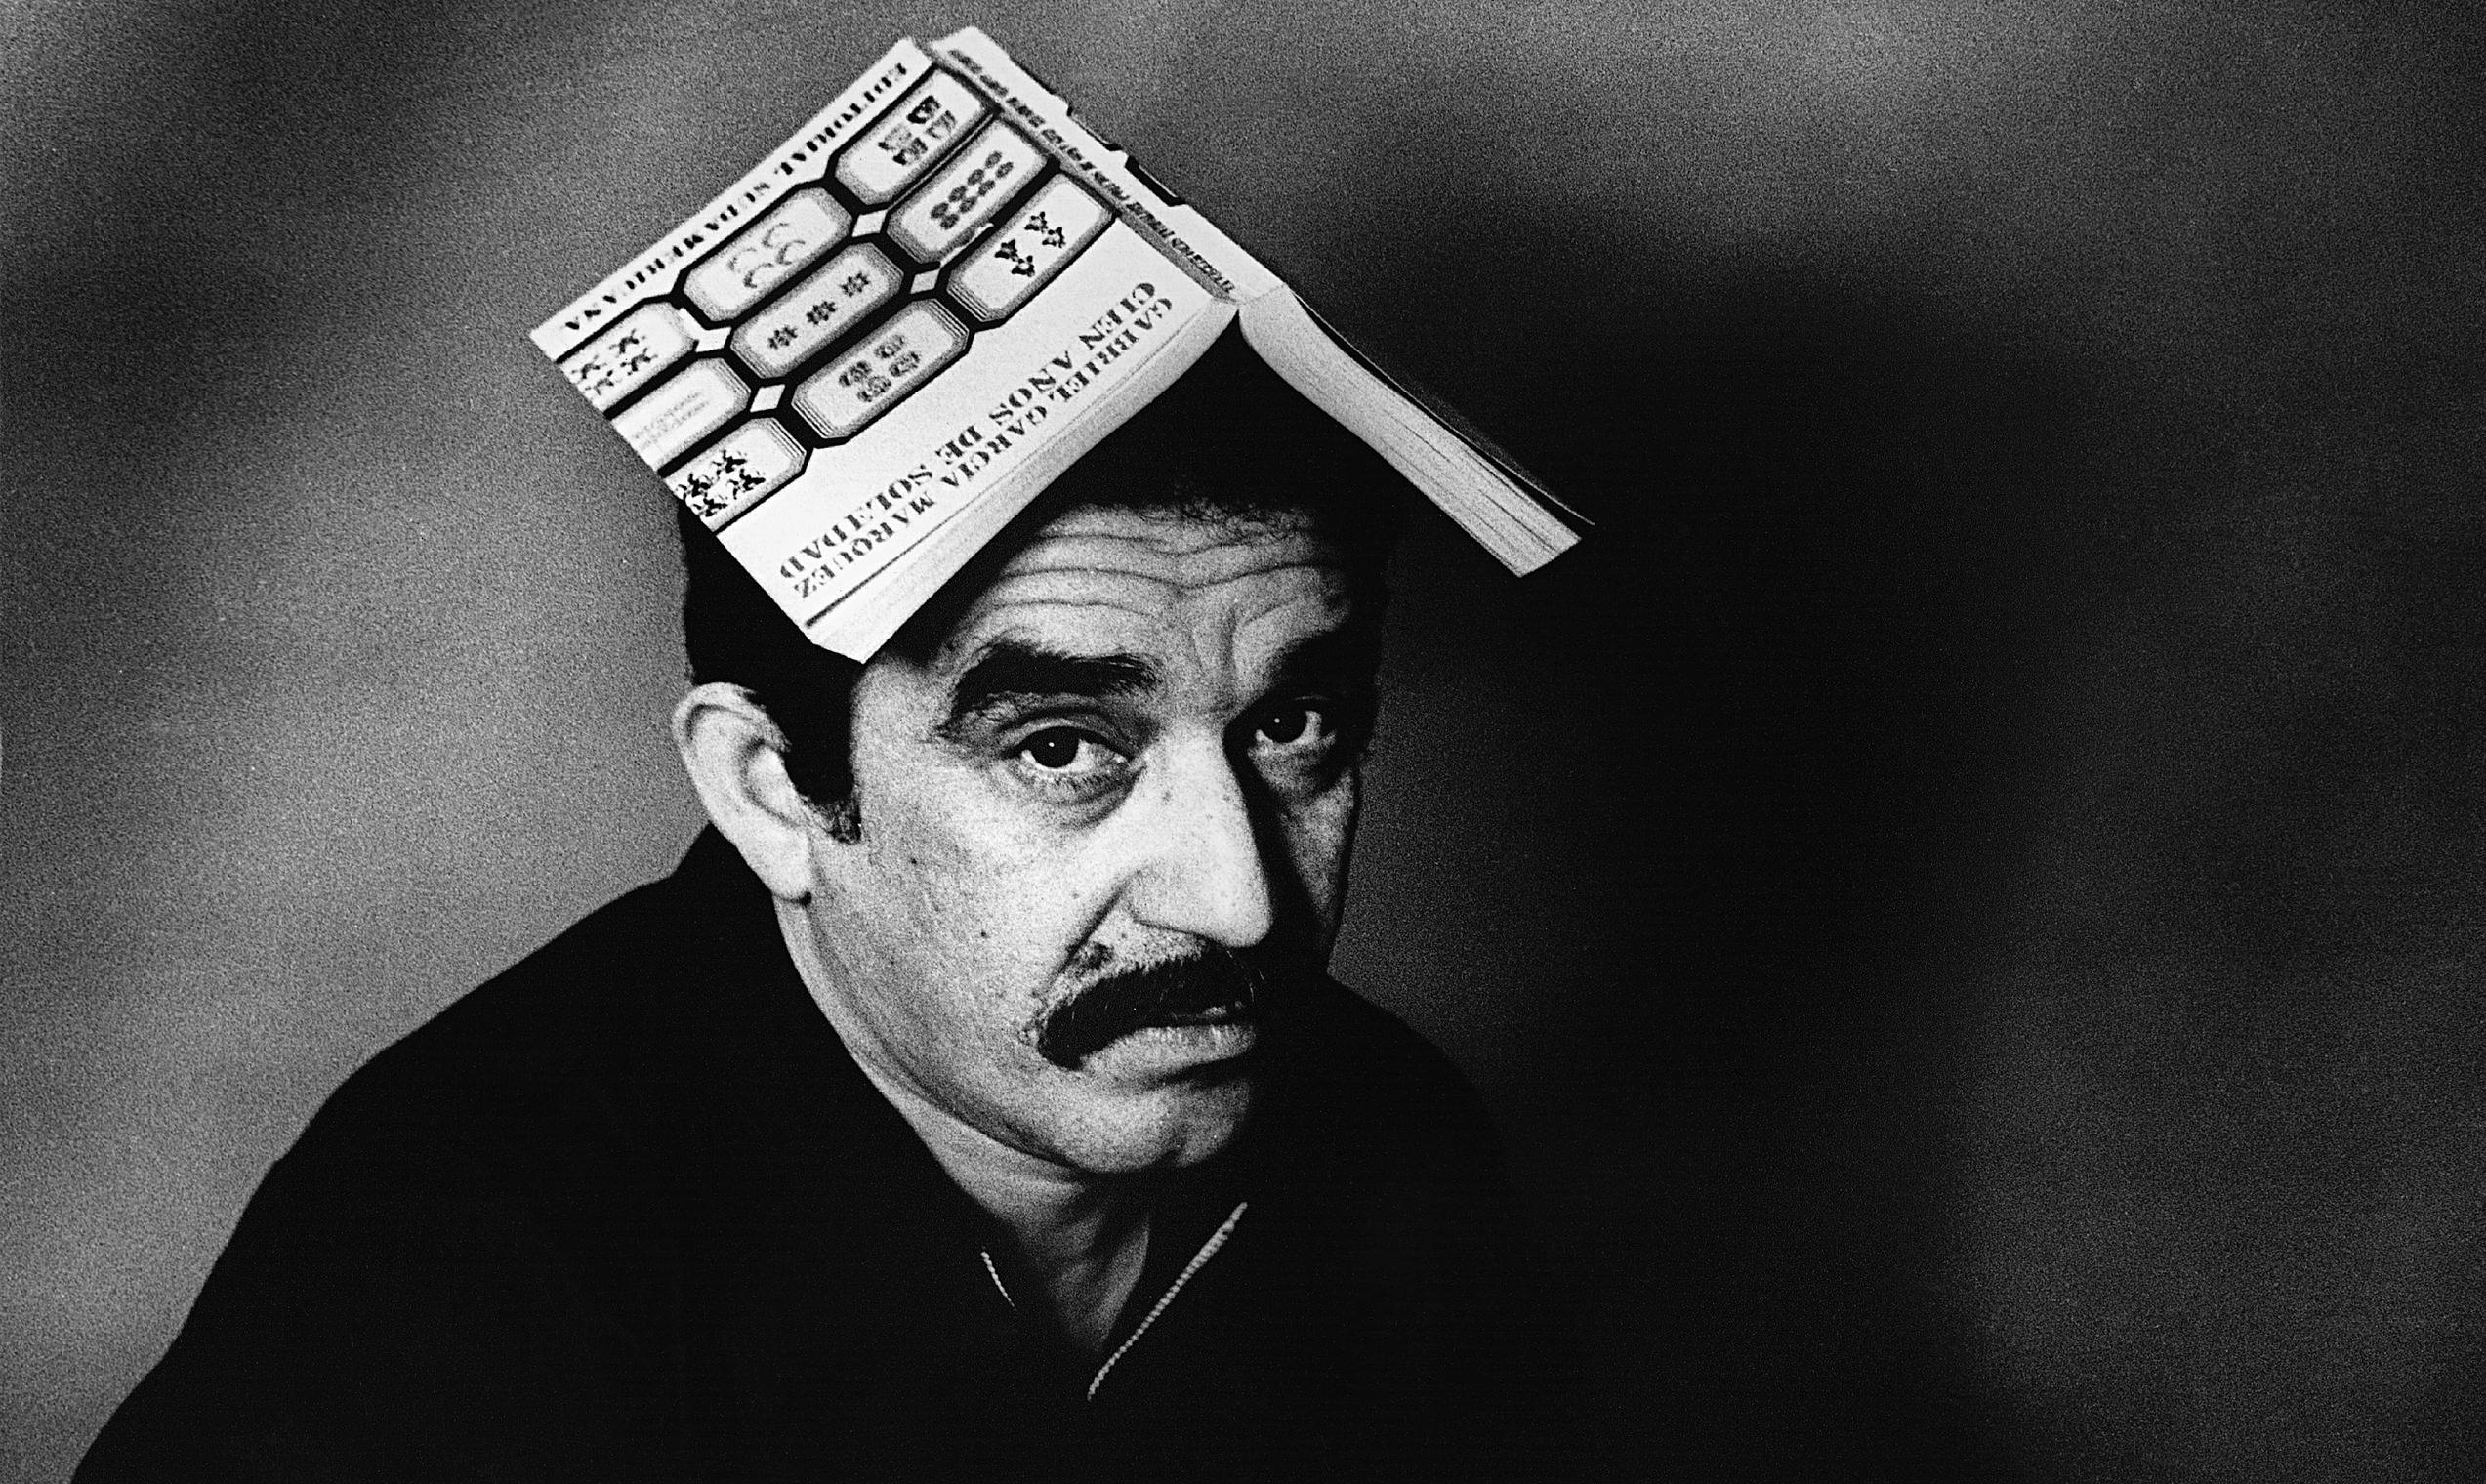 Gabriel García Marquéz with a copy of One Hundred Years of Solitude on his head